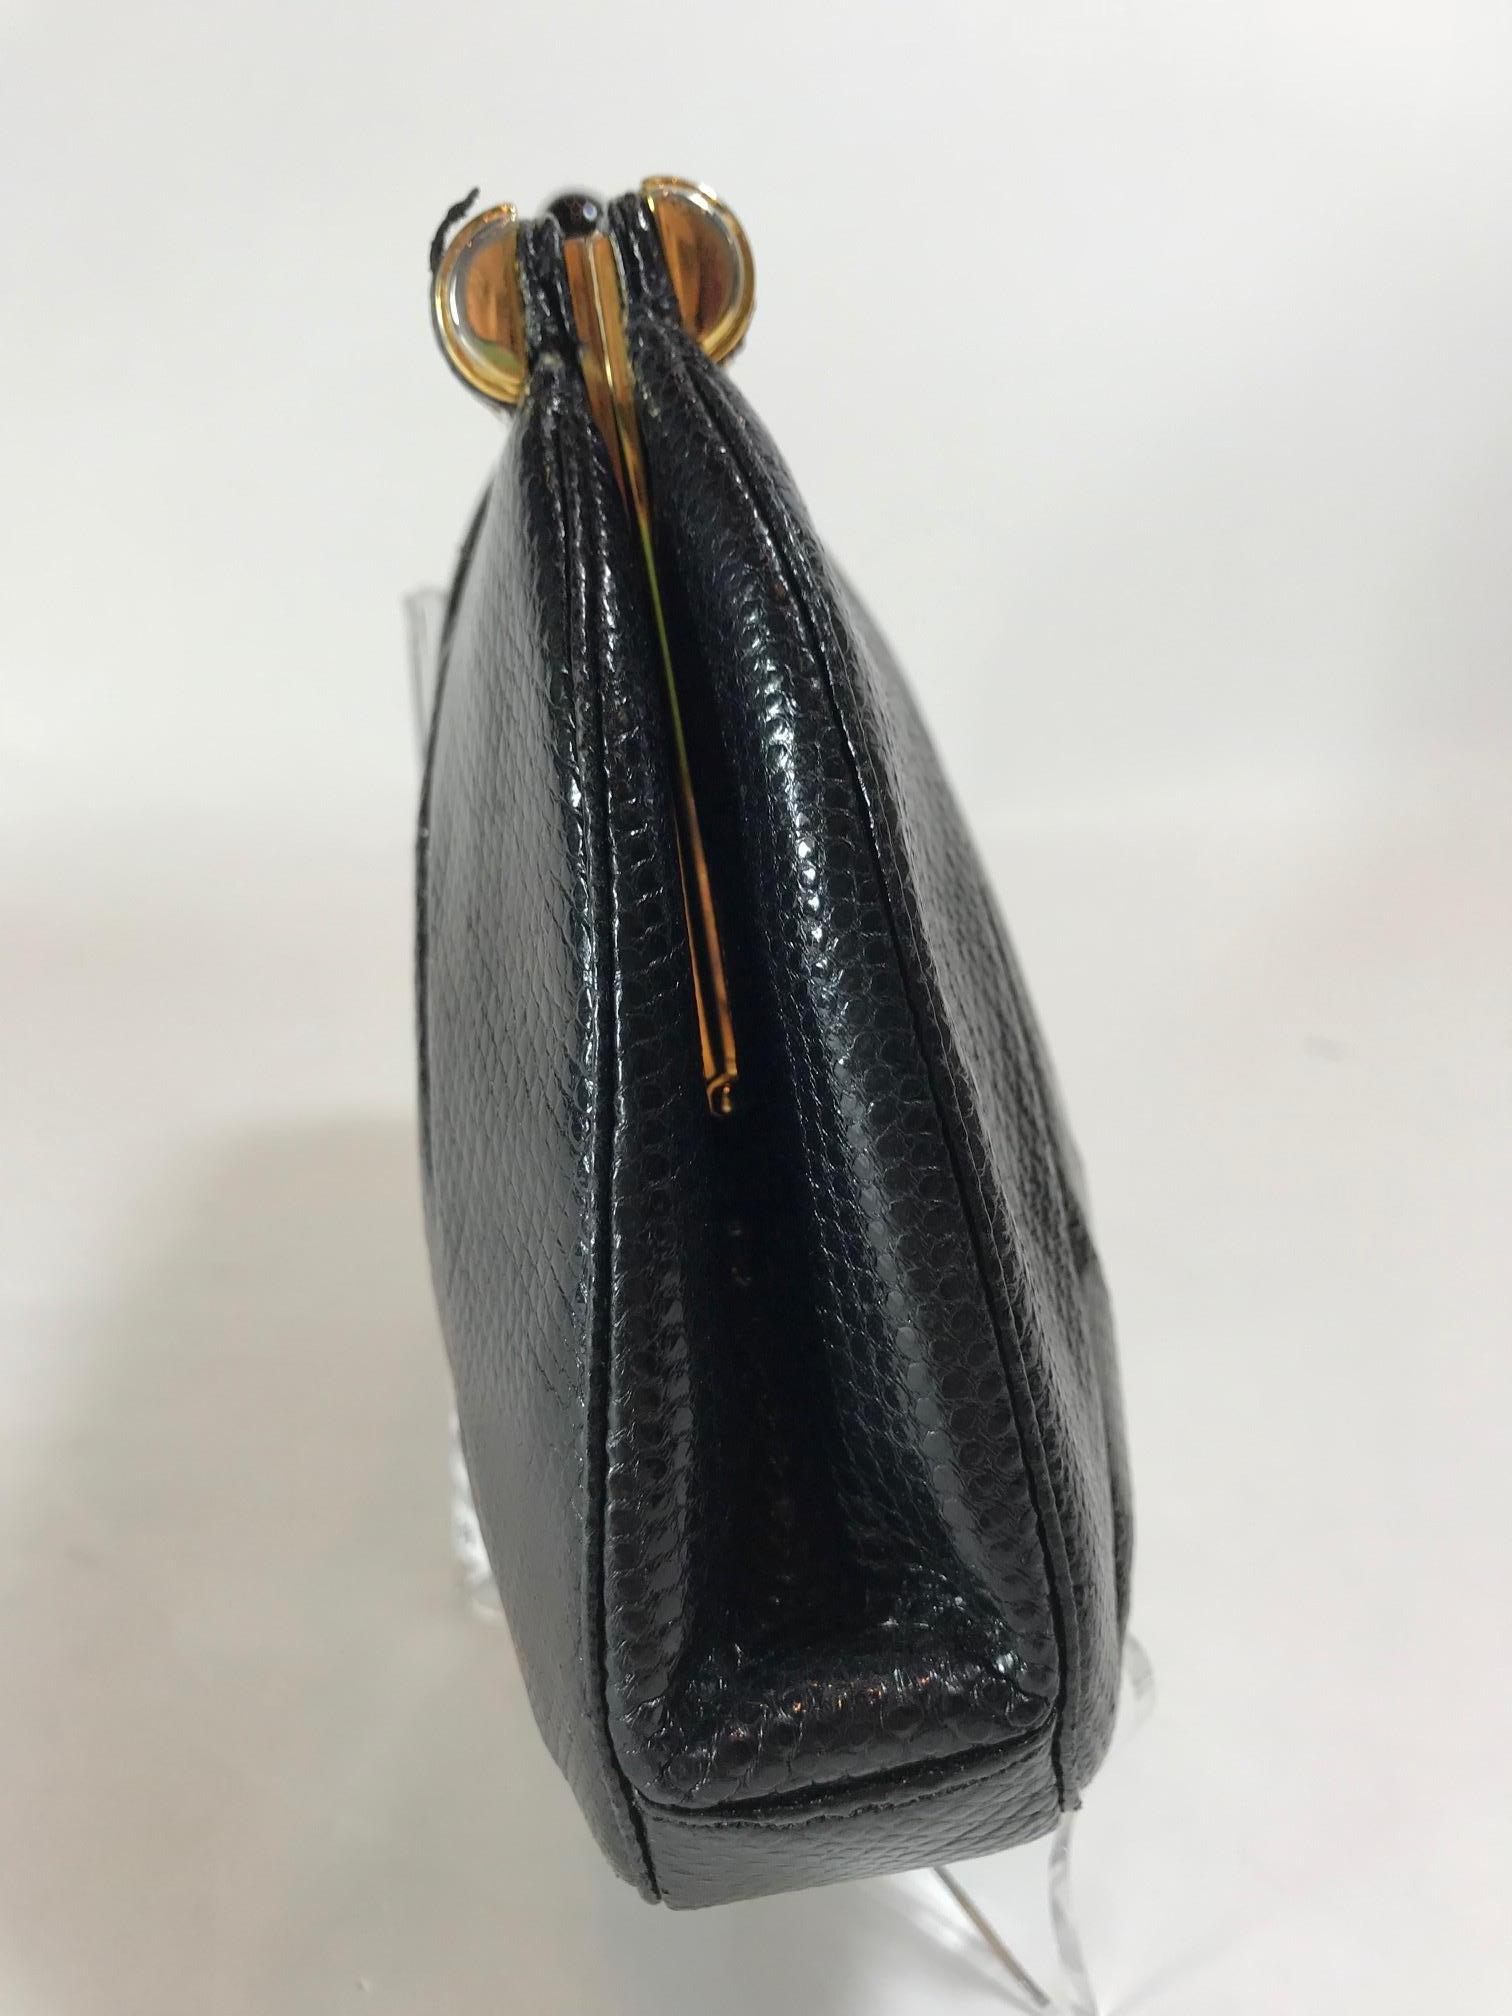 Black pleated Karung Judith Leiber frame clutch with gold-tone hardware, single drop-in flat shoulder strap, tonal grosgrain lining, dual interior pockets; one with zip closure and cabochon-embellished push-lock closure at top frame. 